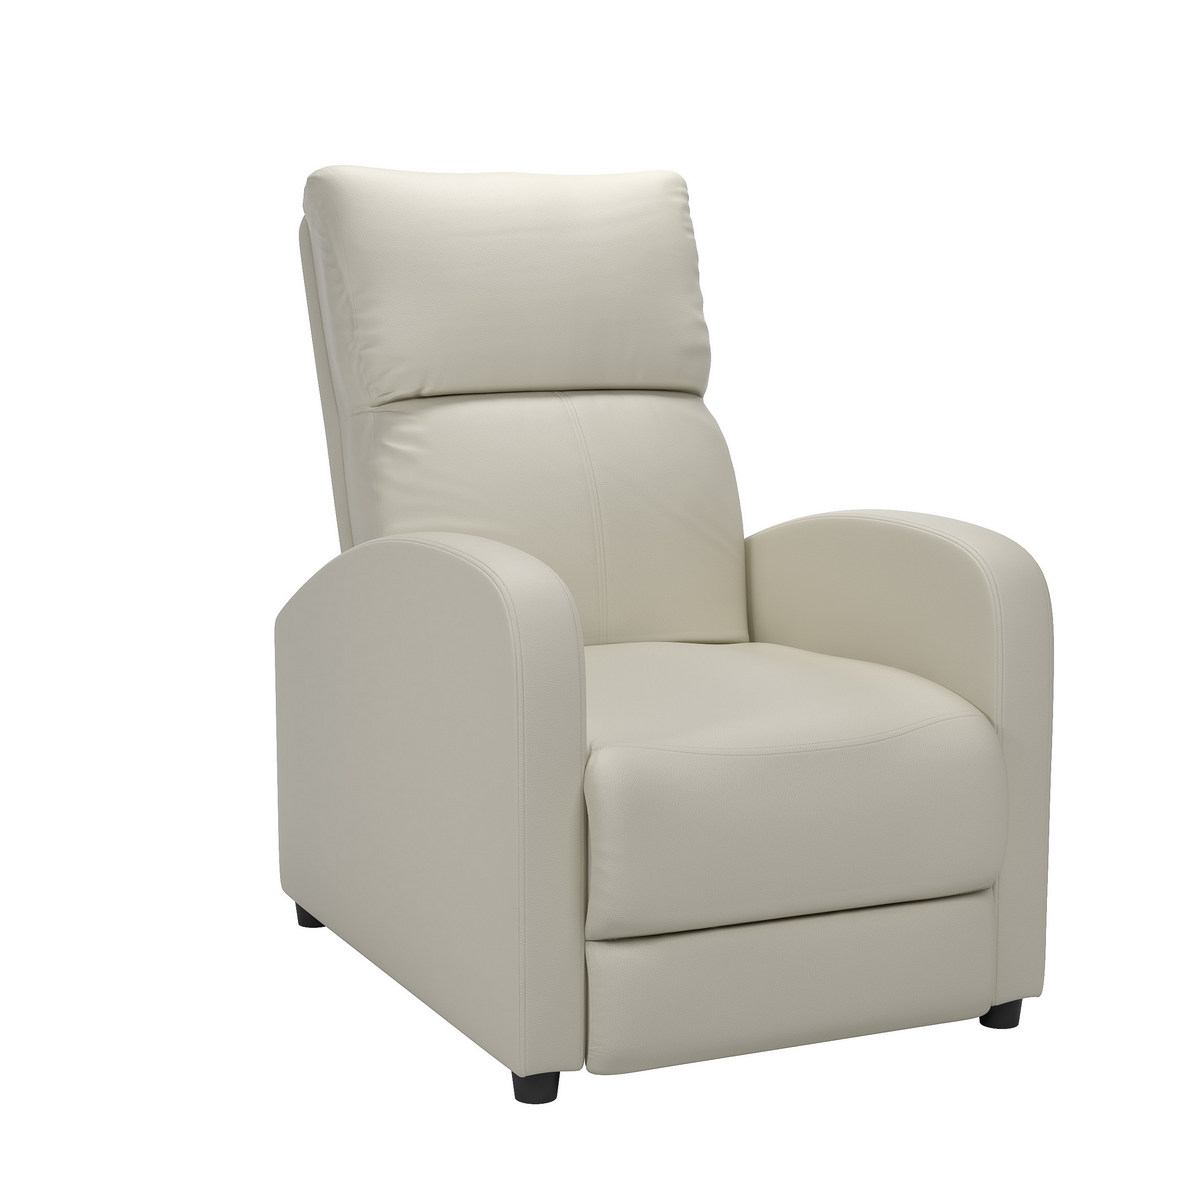 Corliving Lzy-519-r Moor White Bonded Leather Recliner